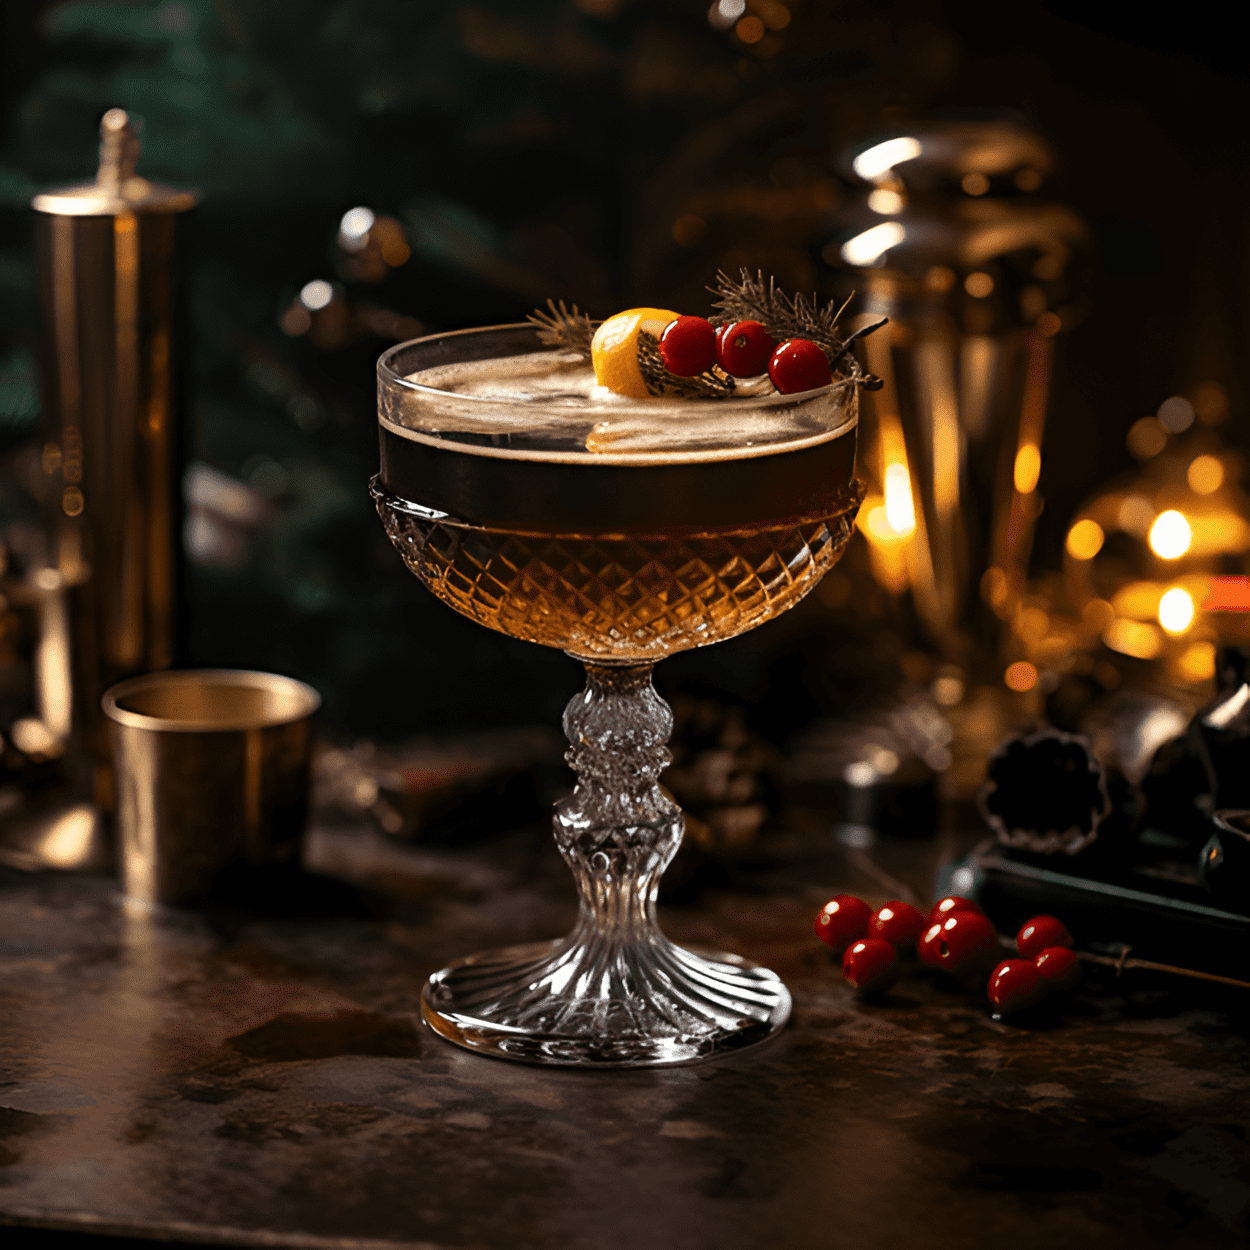 Merry Widow Cocktail Recipe - The Merry Widow cocktail has a complex and well-balanced taste. It is slightly sweet, with a hint of bitterness from the vermouth. The herbal notes from the bitters and the warmth of the brandy create a smooth and satisfying finish.